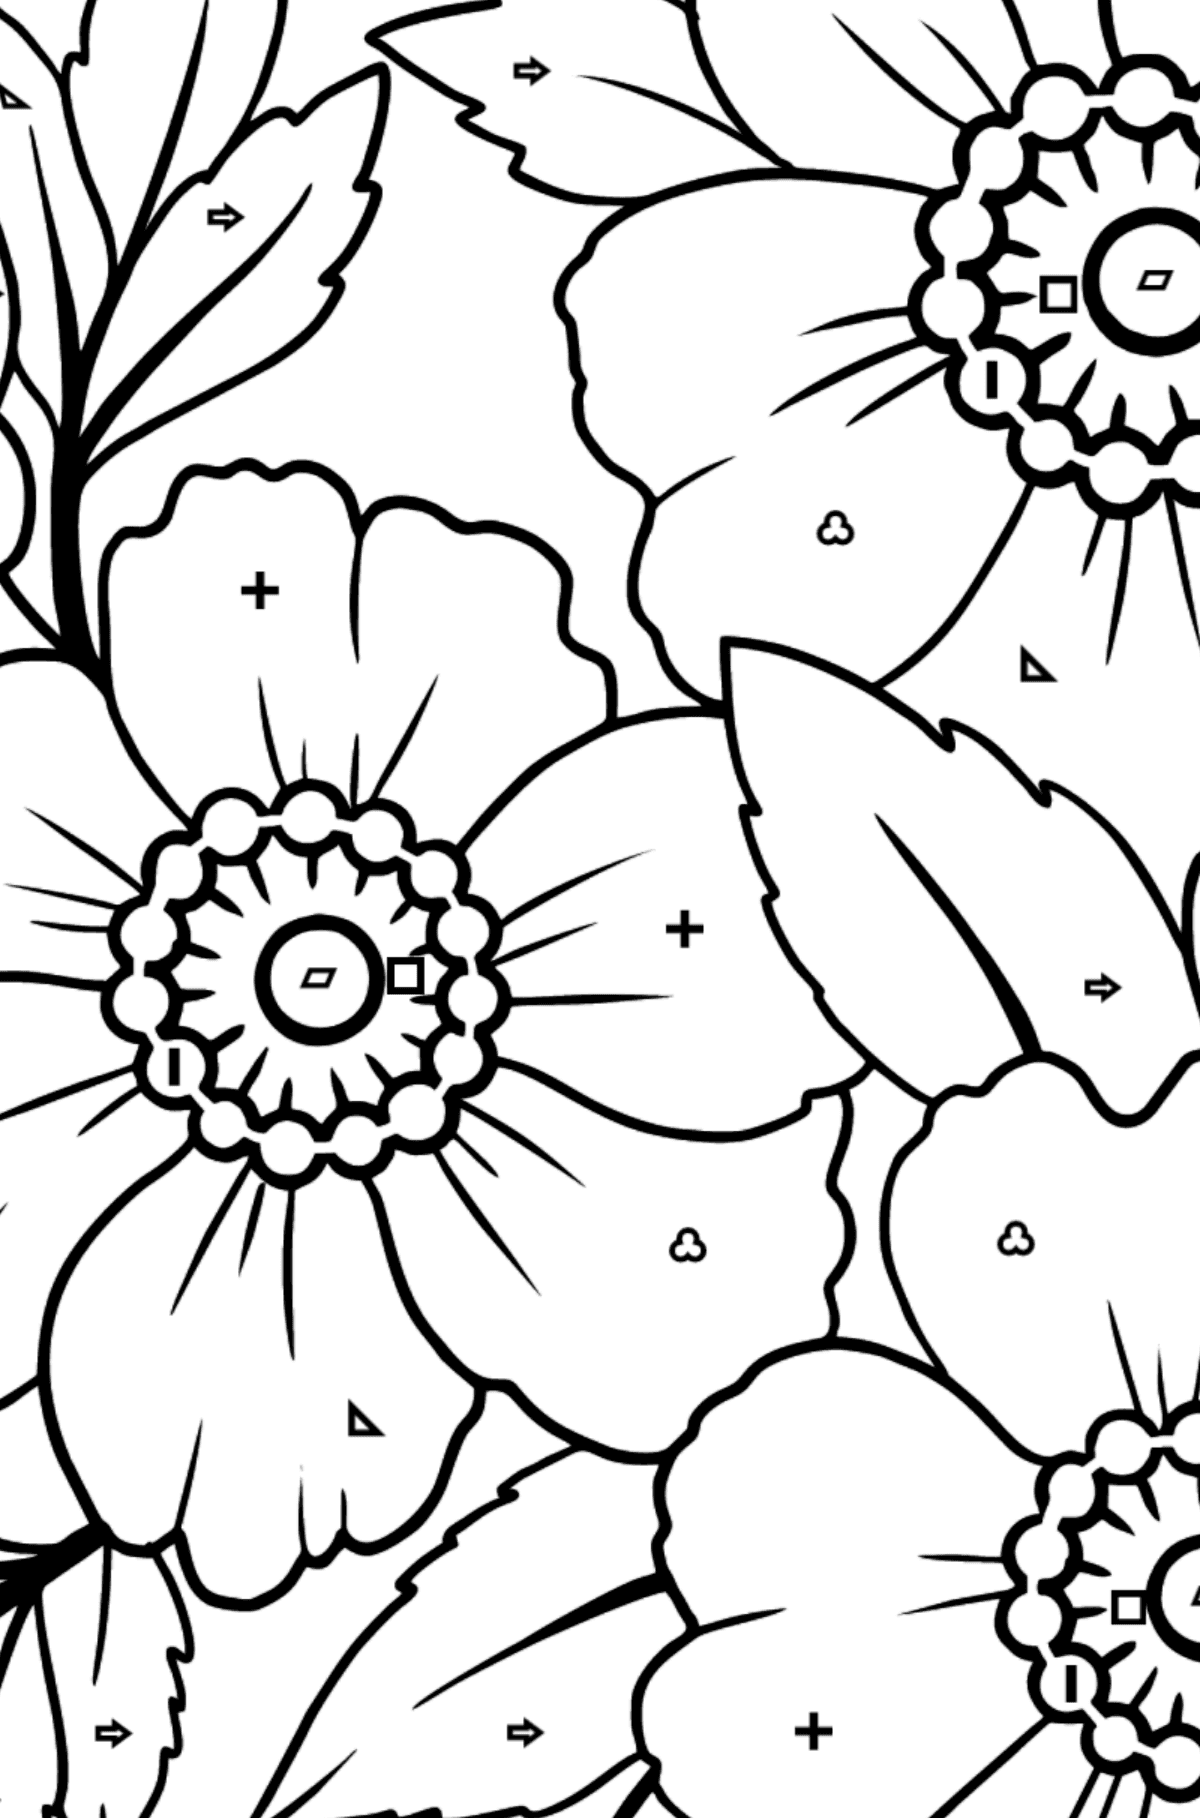 Flower Coloring Page (A4) - A Japanese Anemone with Pink Petals - Coloring by Symbols and Geometric Shapes for Kids